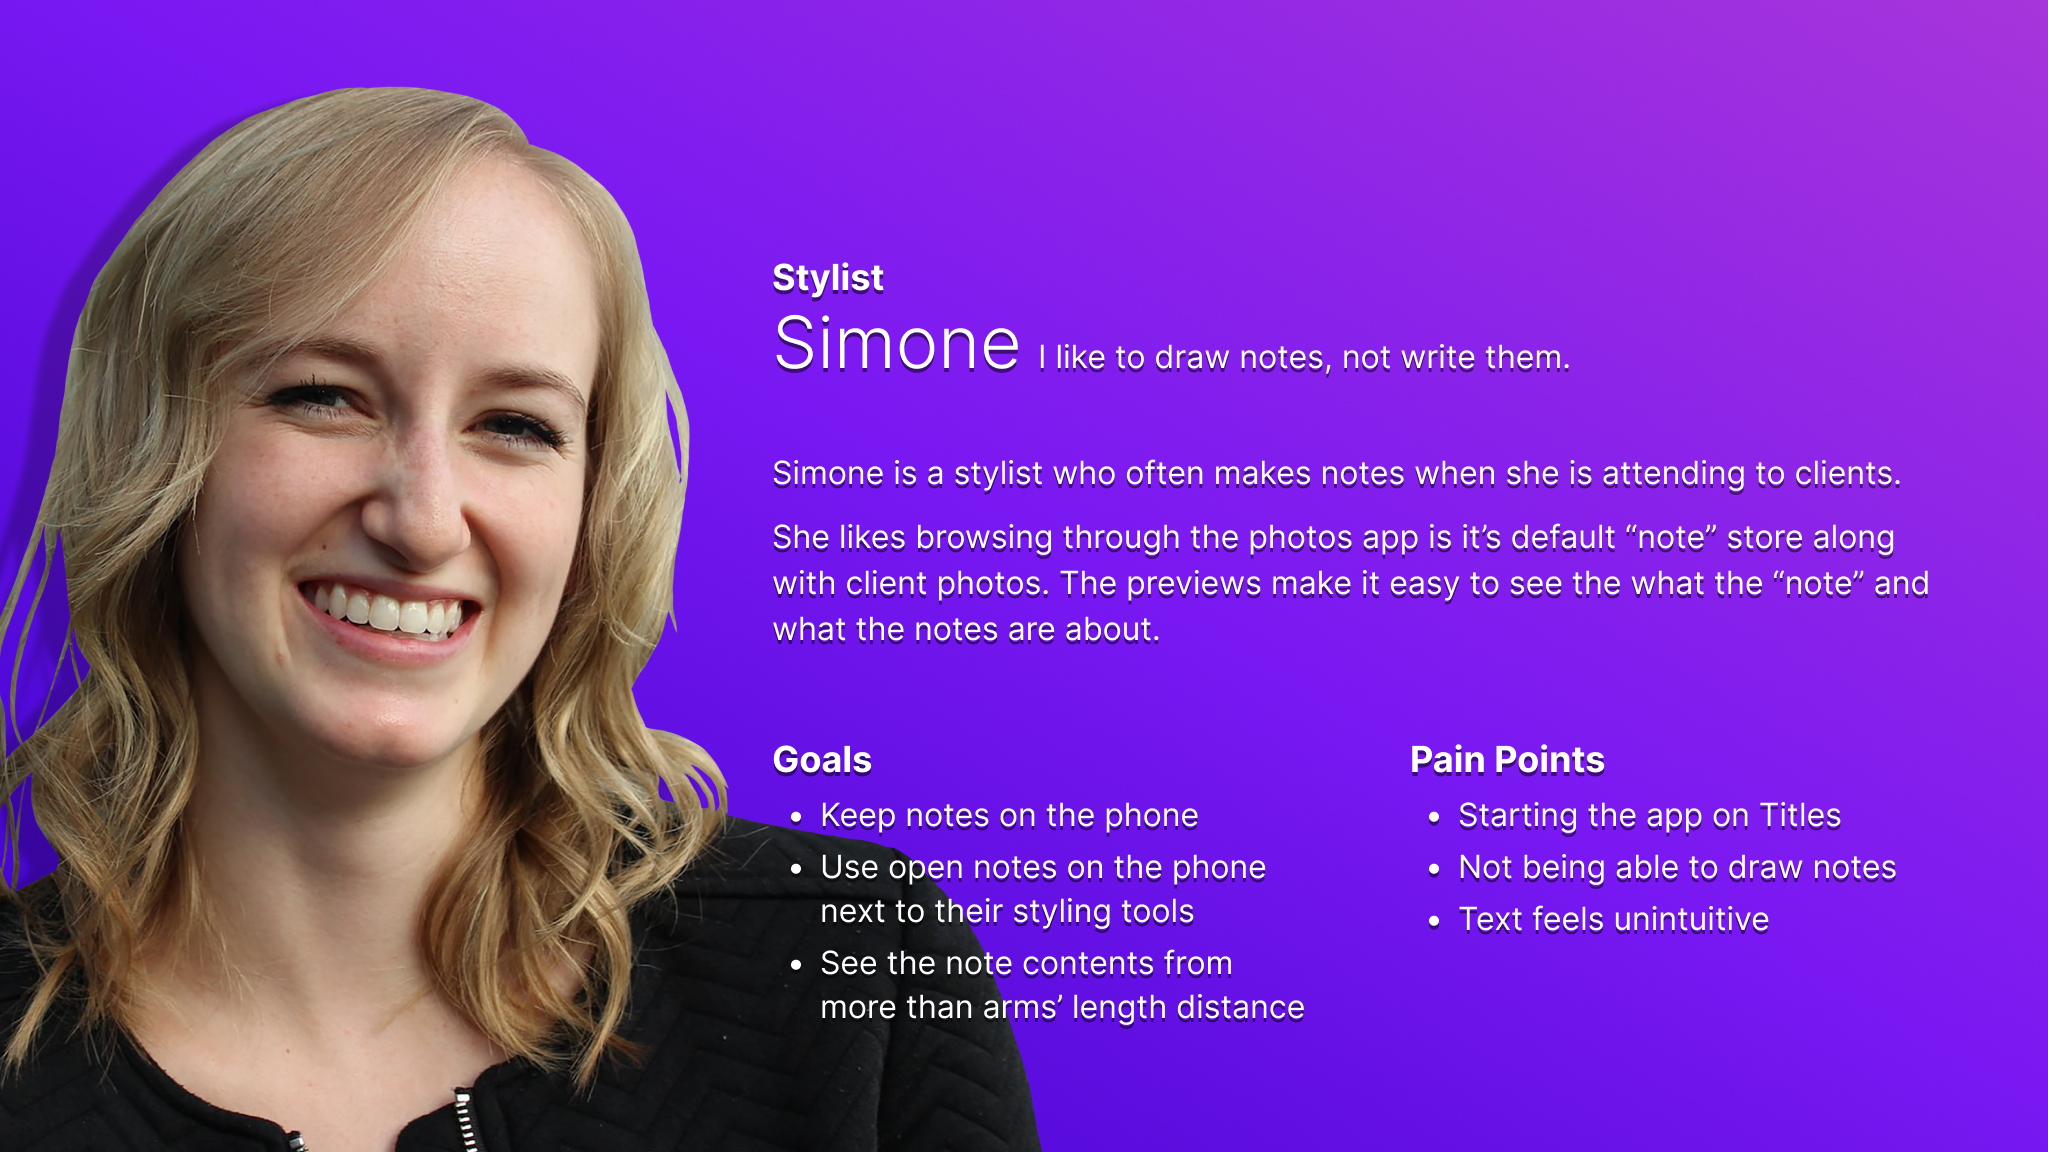 Persona card for Simone who represents users who don’t have much time to create visual notes.